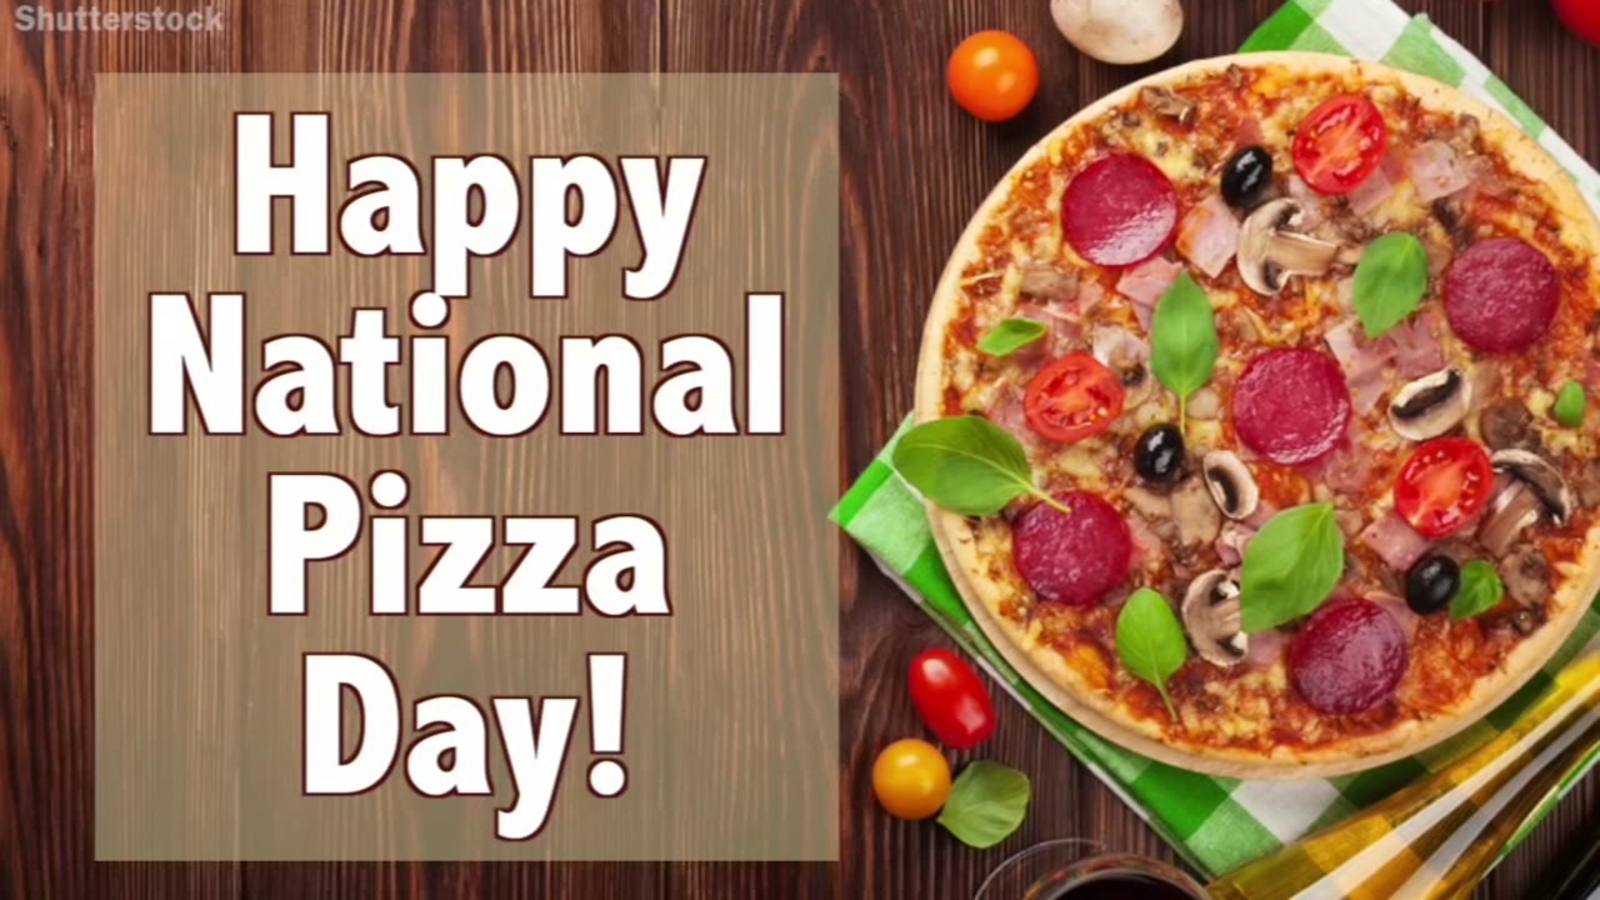 It’s National Pizza Day!